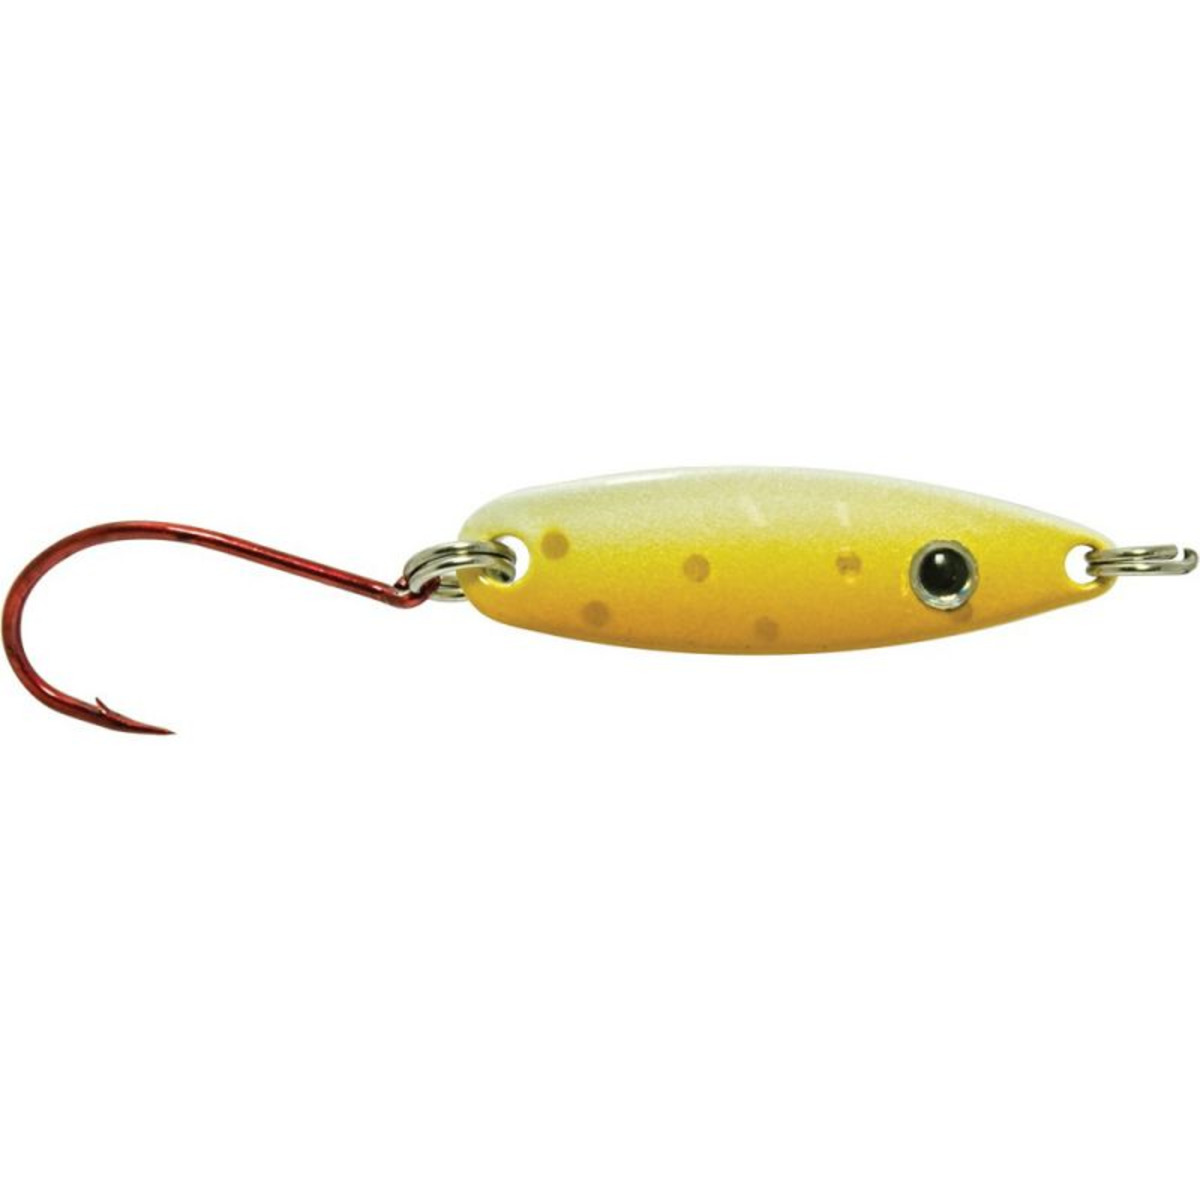 Rapture Silver Trout - 6.0 g - 43 mm - 10 - YT